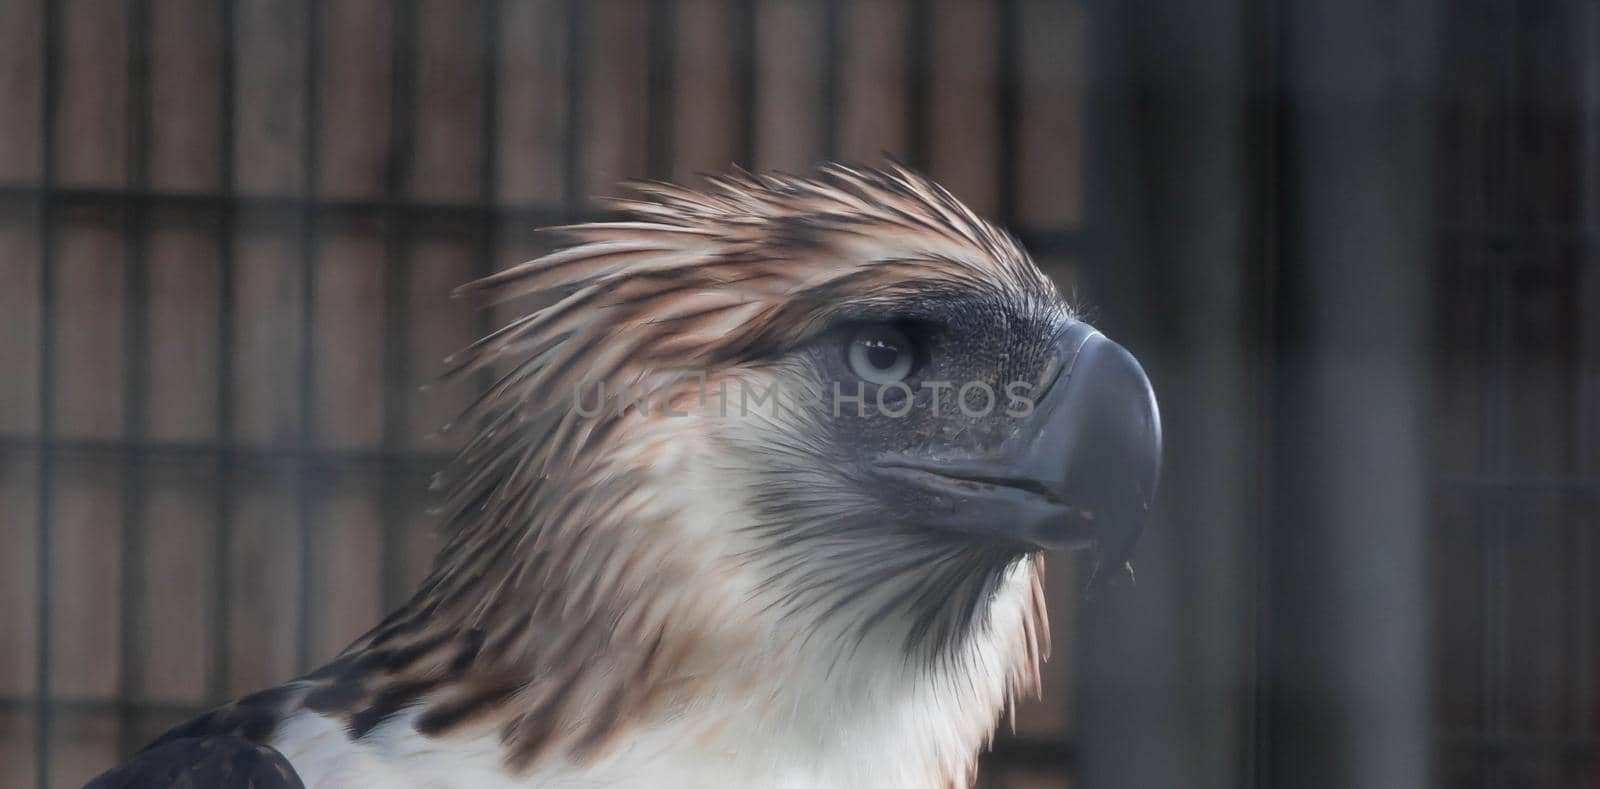 A Philippine Eagle also known as the Monkey-eating Eagle